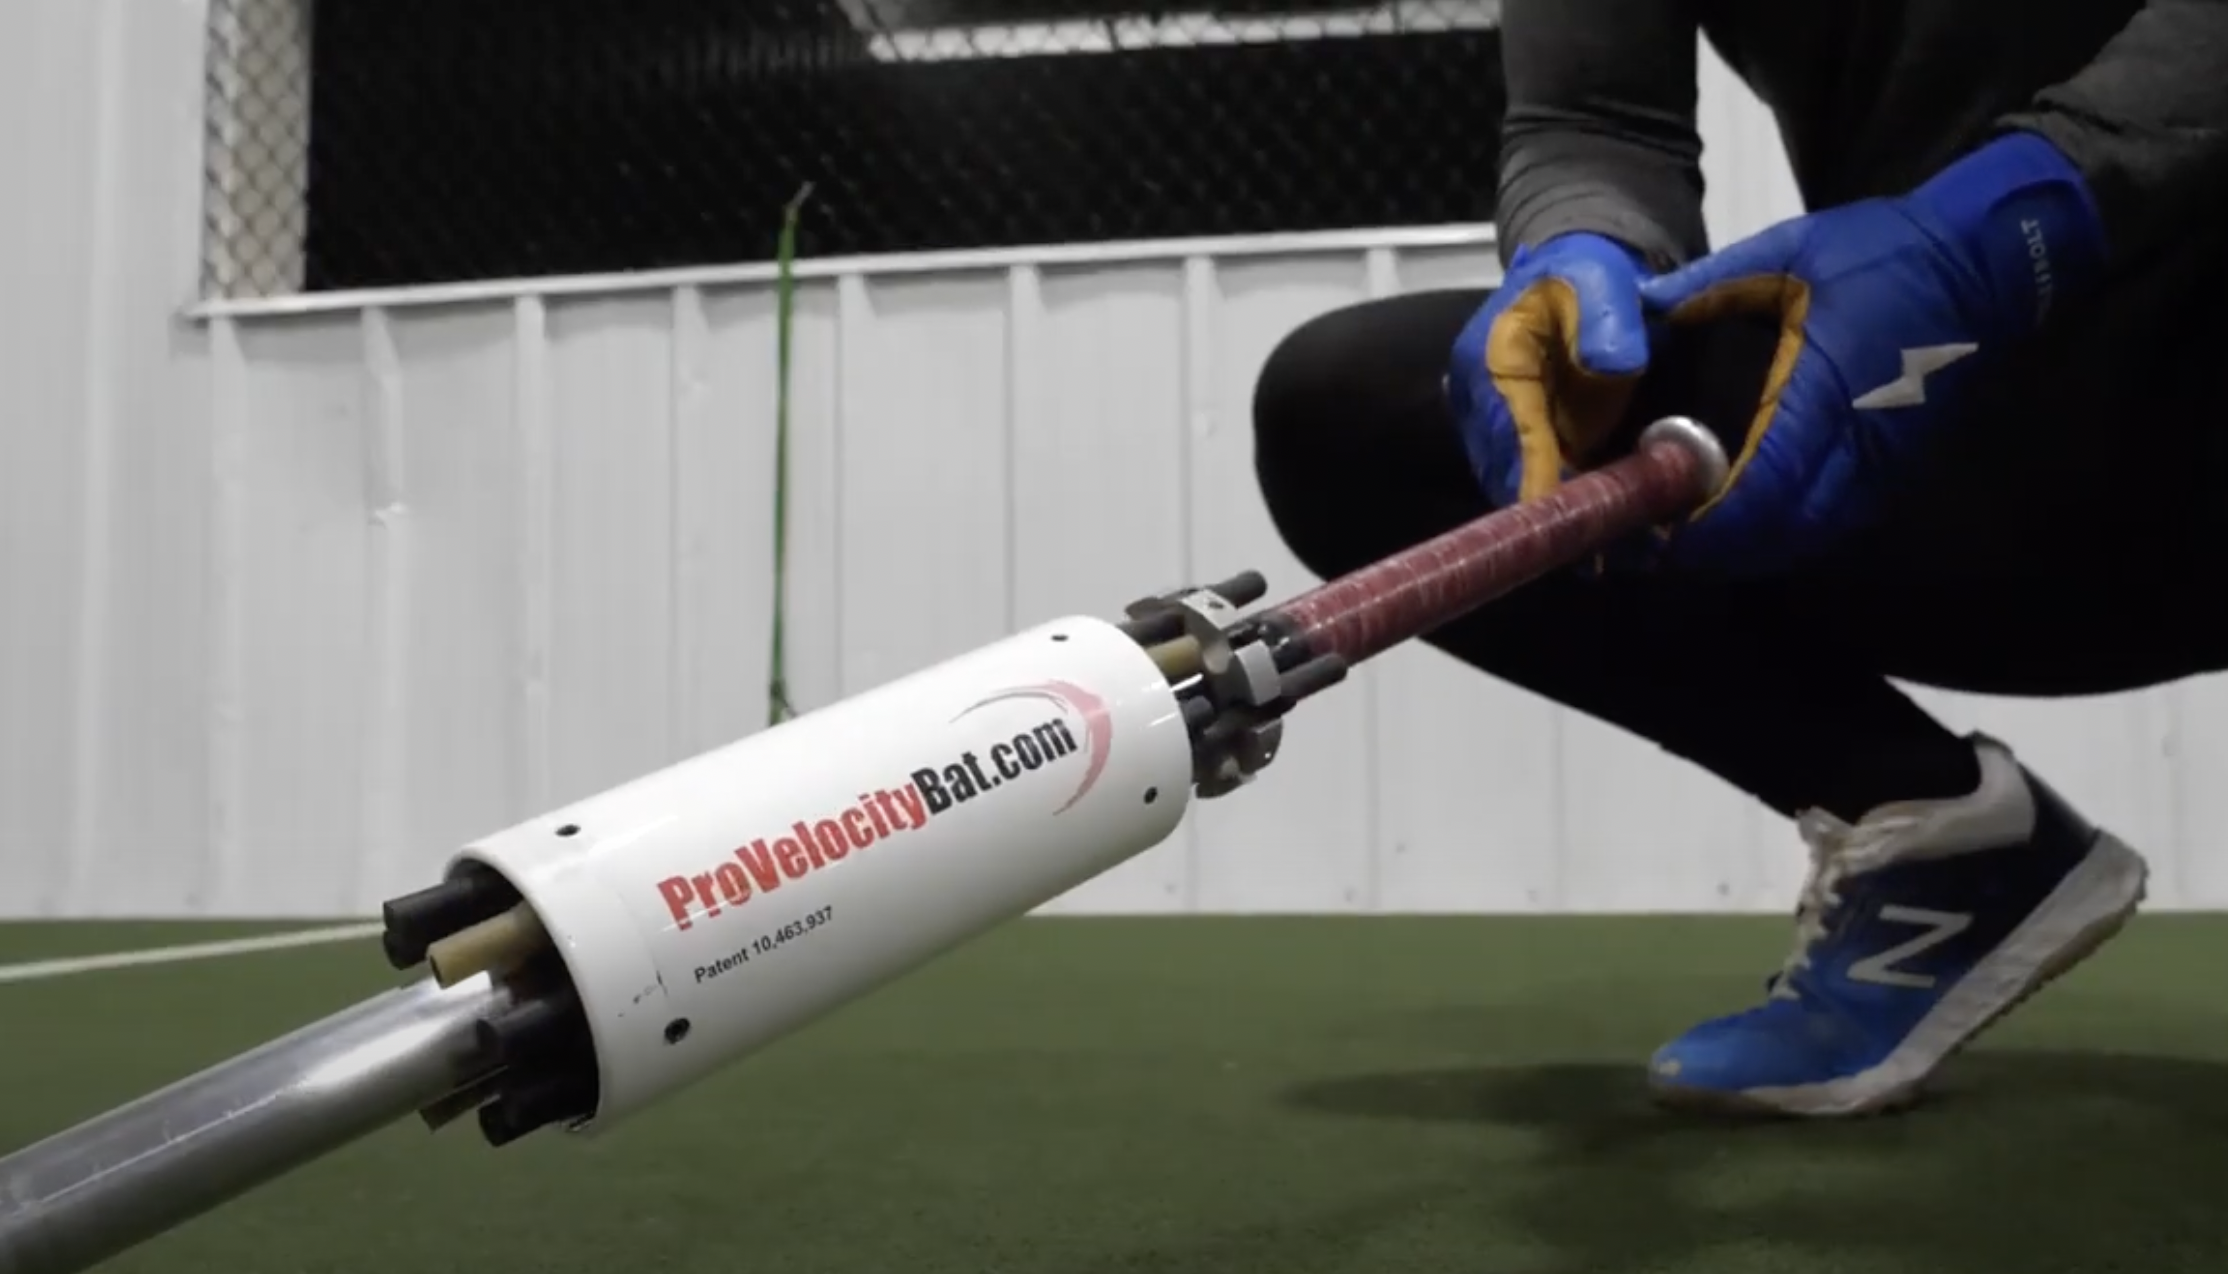 ProVelocity Bat - NEW Baseball Hitting Aid Increasing Bat Speed by Up to 15 Miles Per Hour